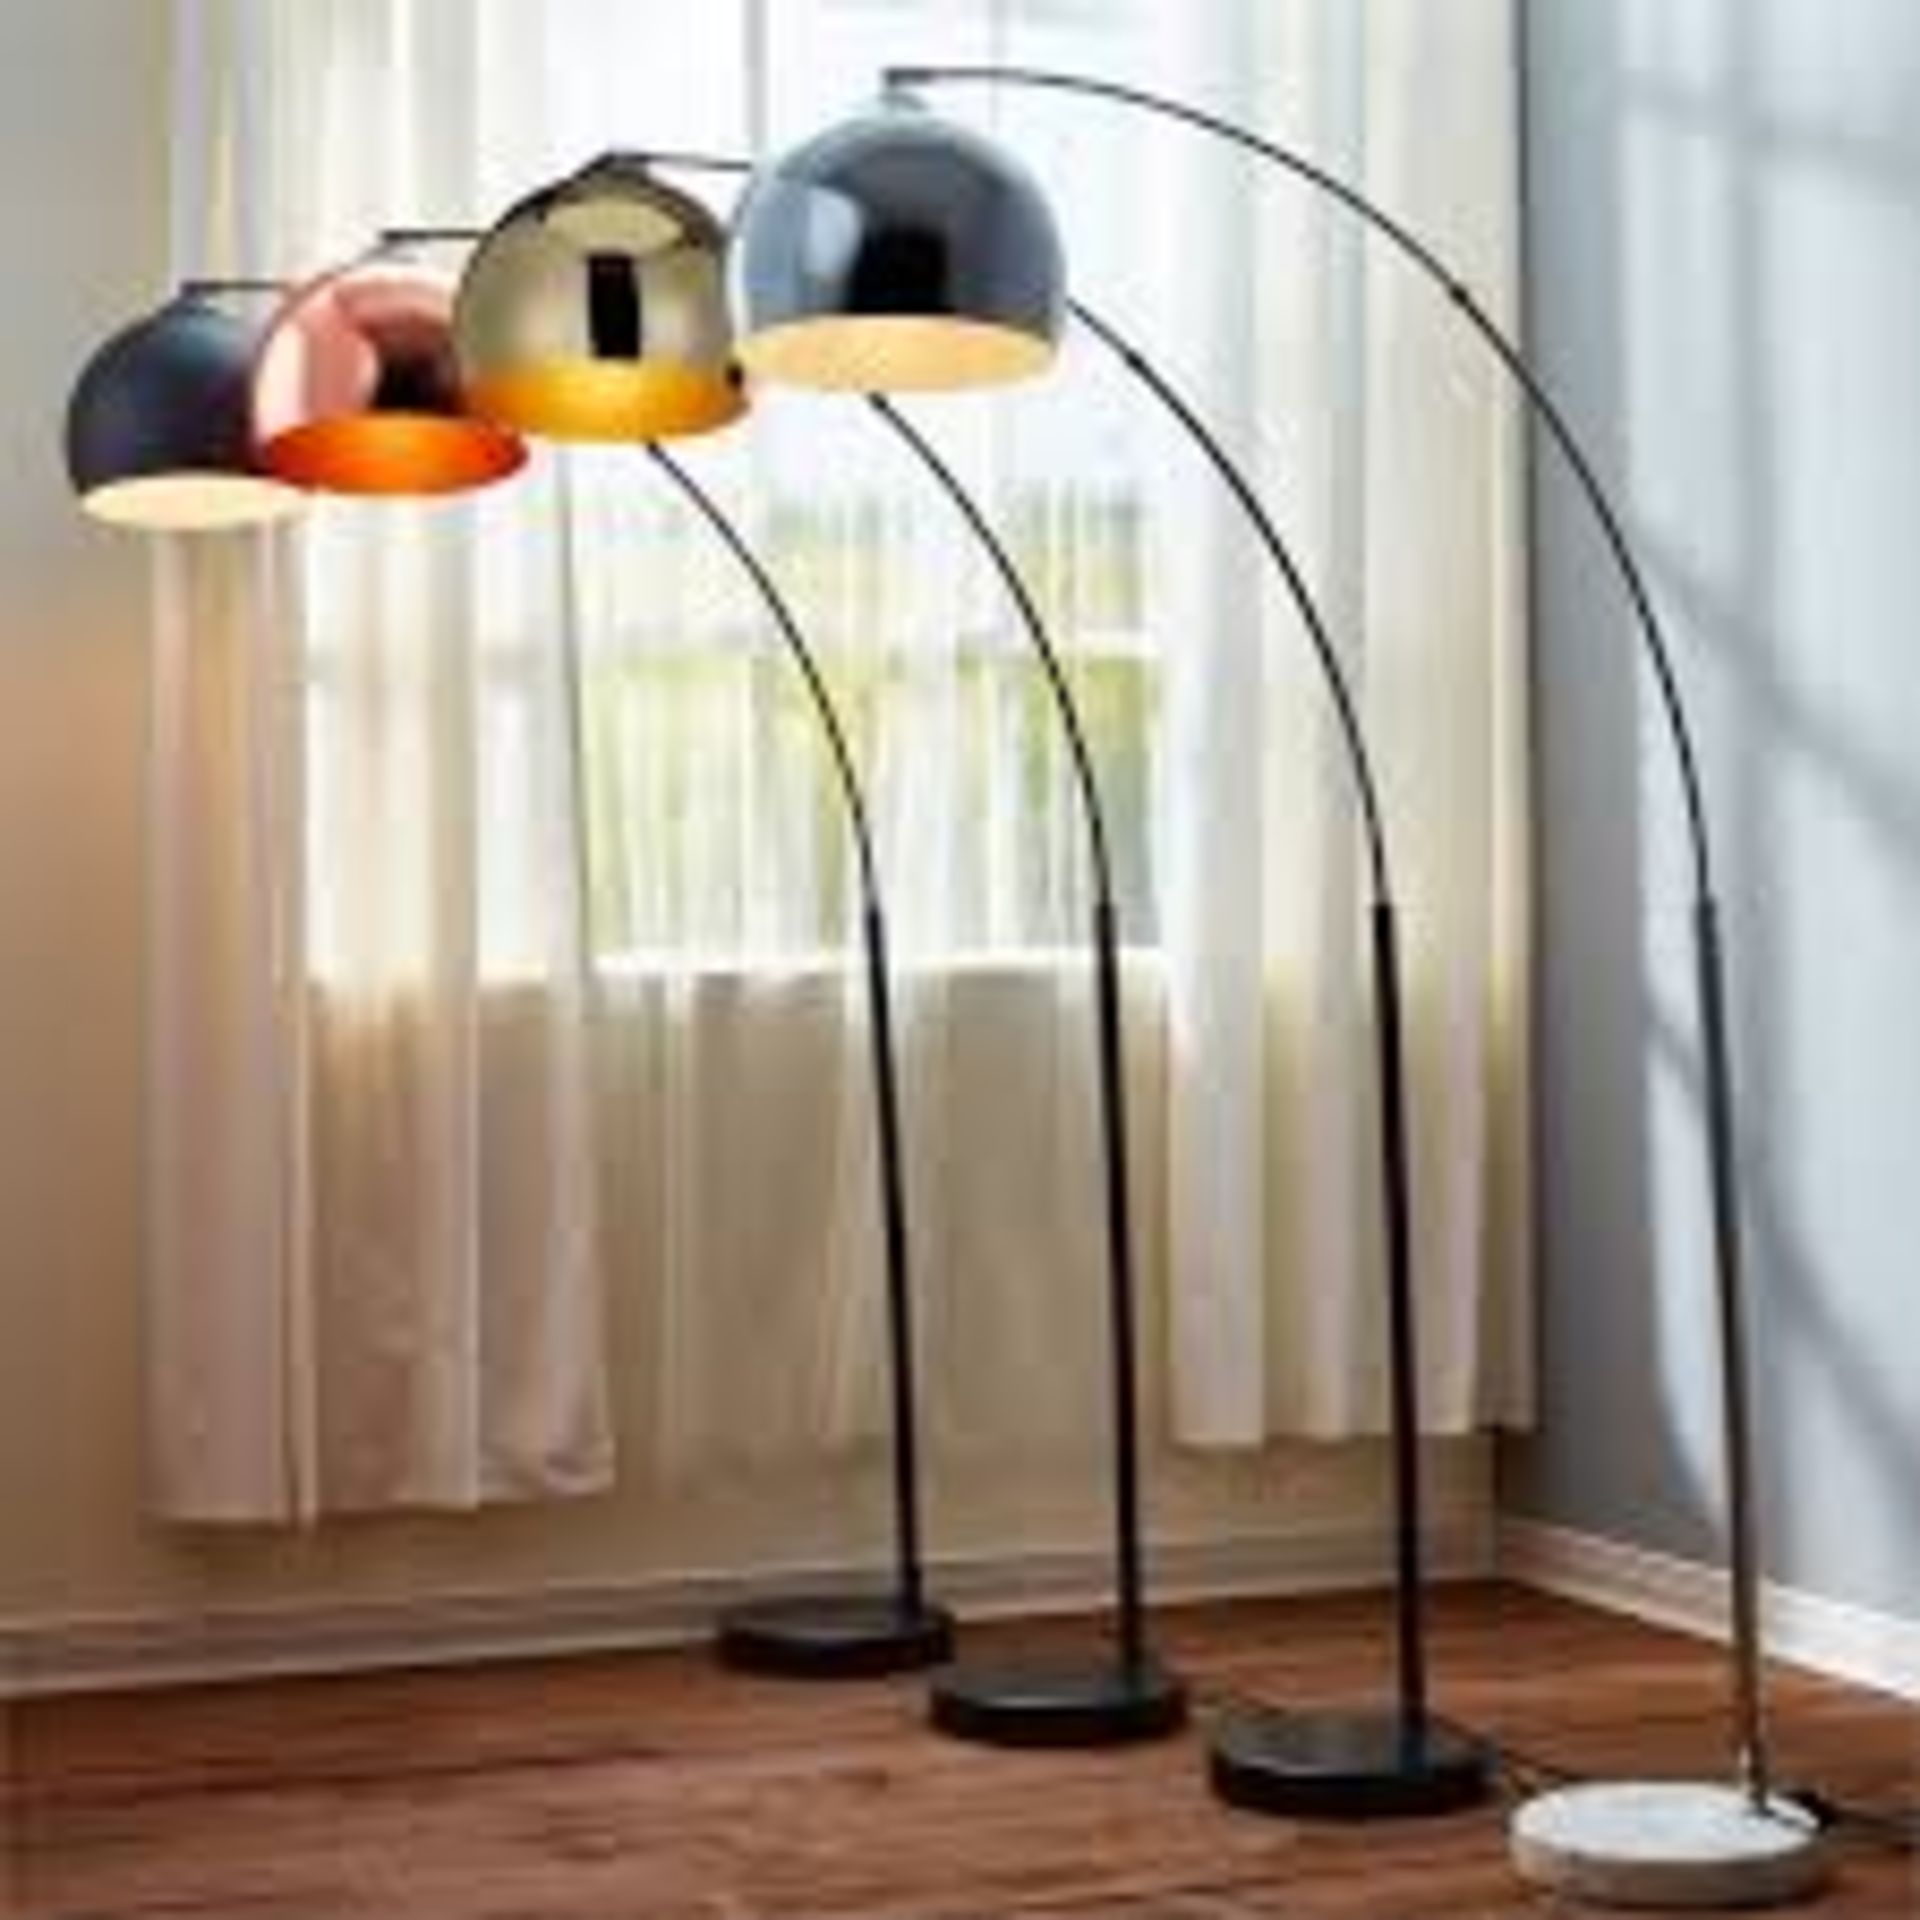 Boxed Arquer Ark Floor Lamp RRP £80 (Pallet no 15974) (Public Viewing and Appraisals Available)